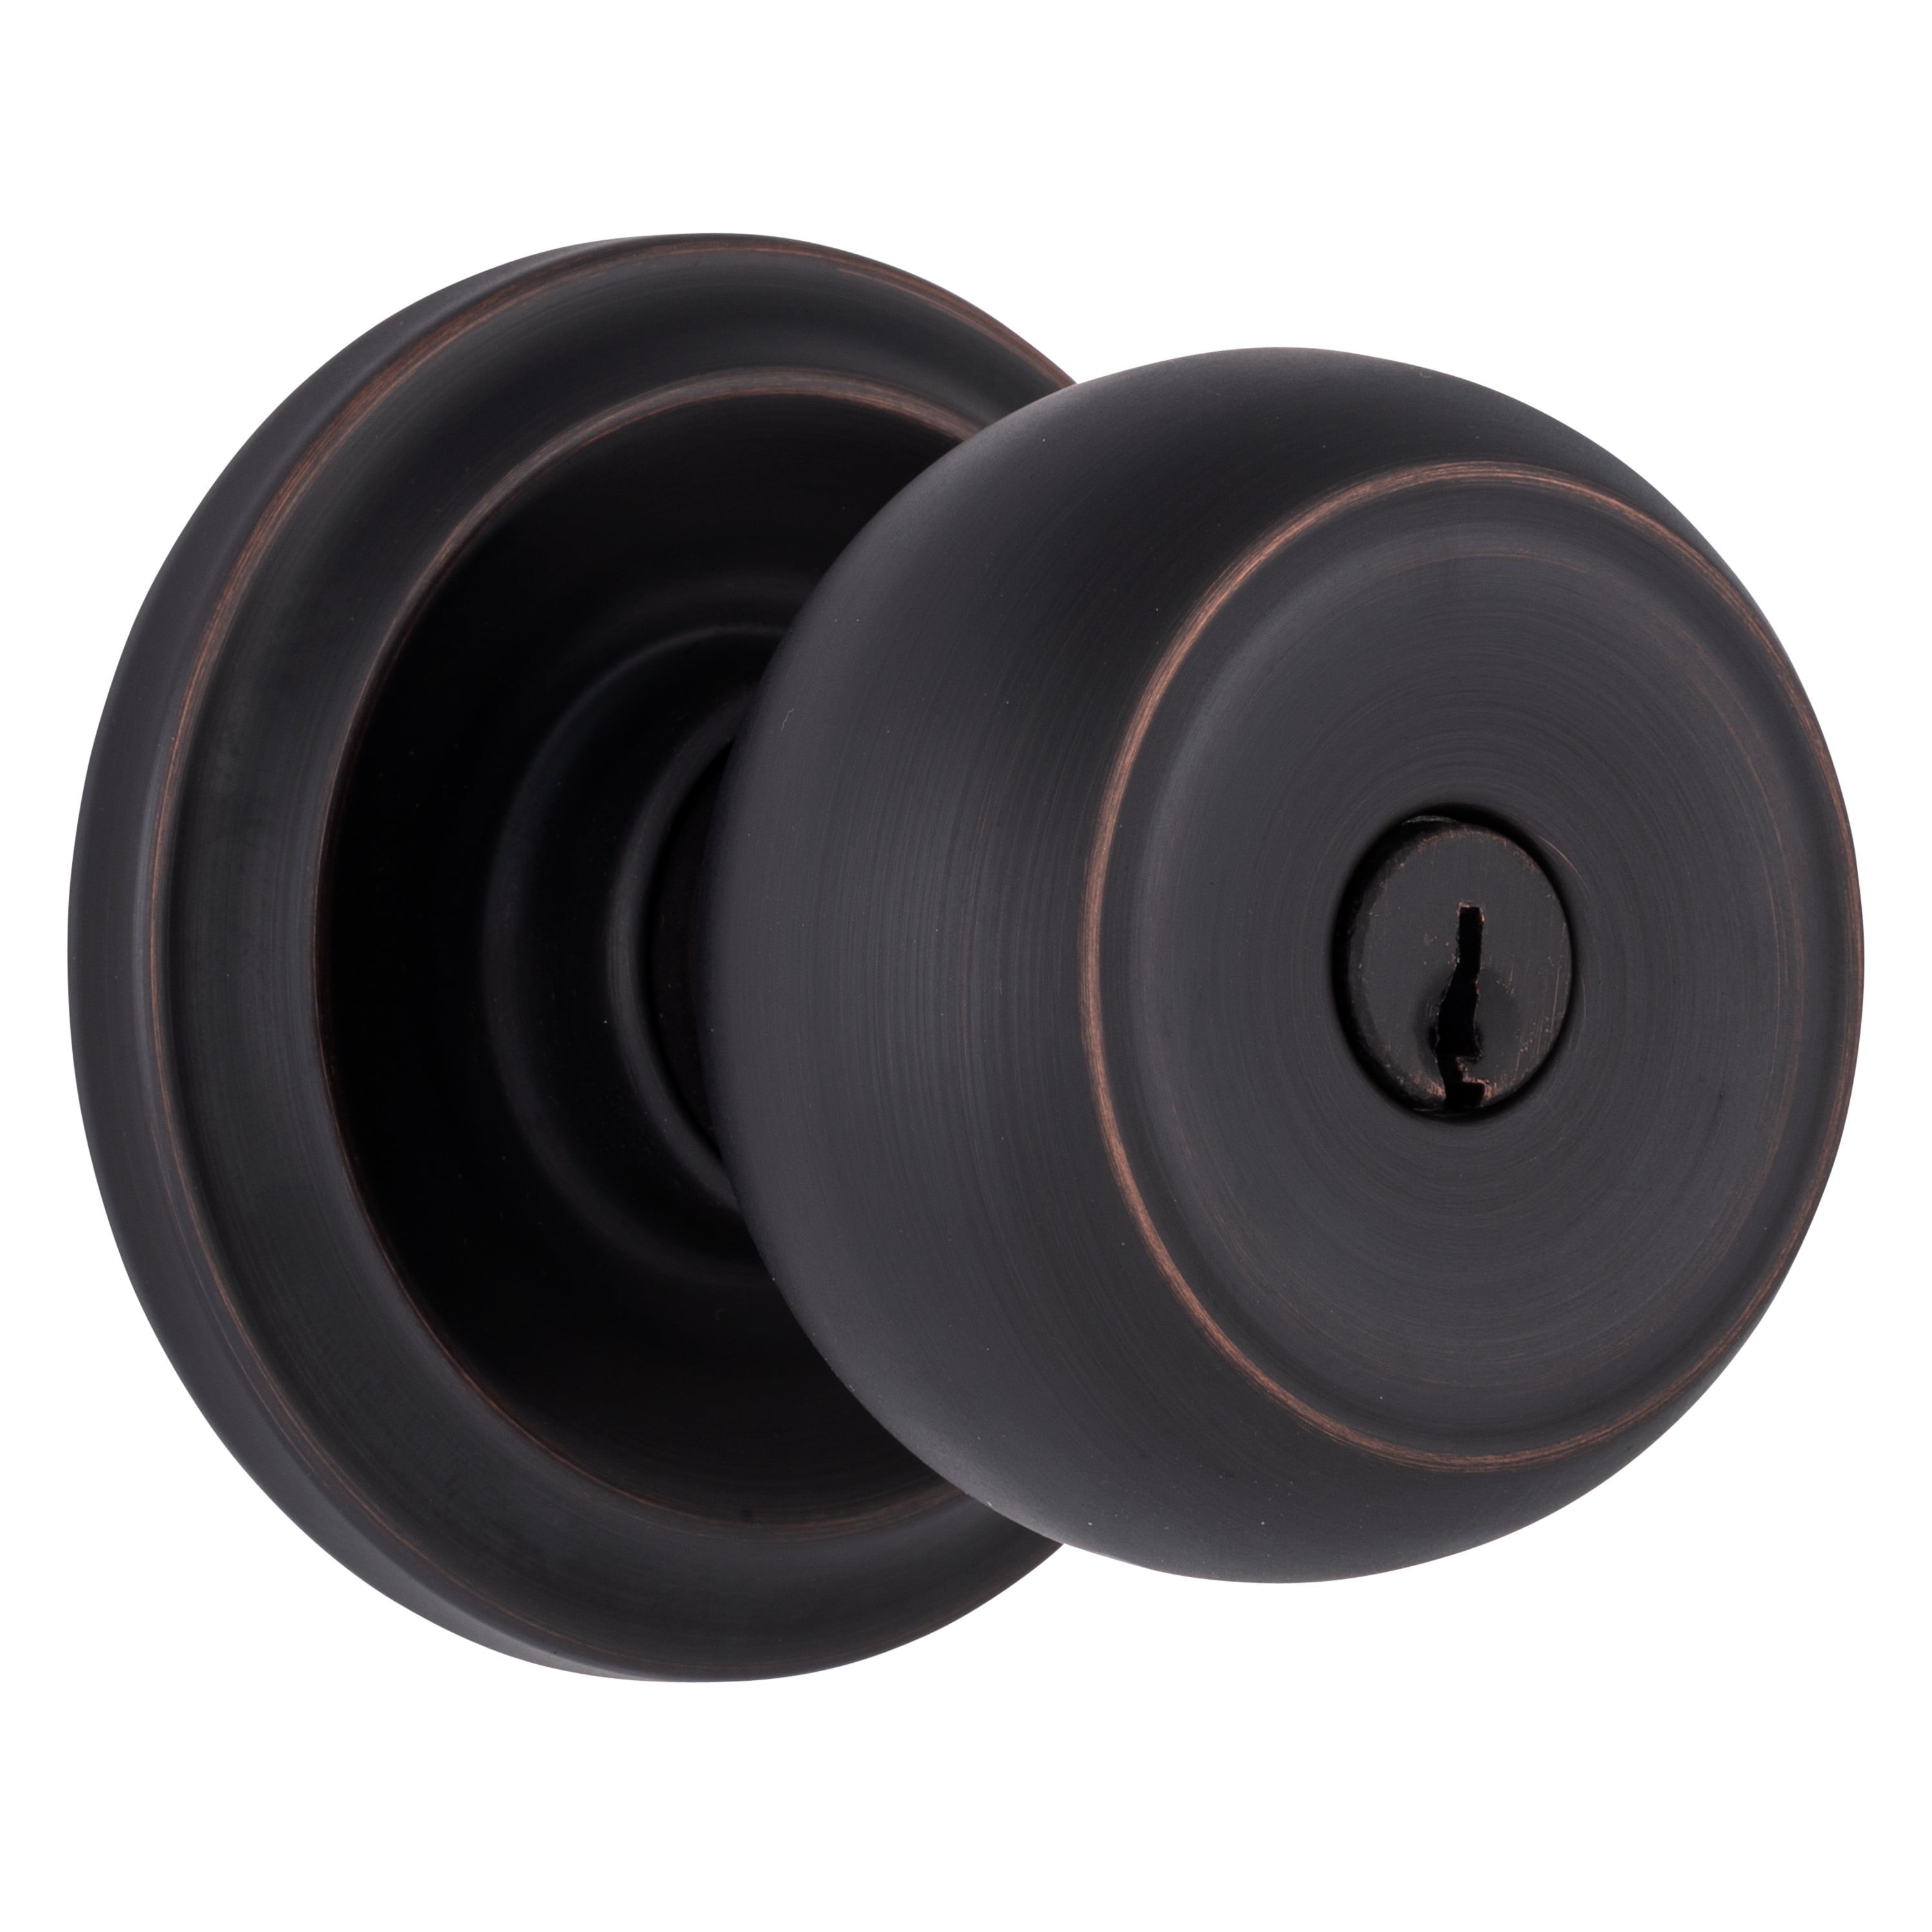 5986476 Stafford Oil Rubbed Bronze Single Cylinder Lock, Ansi Grade 2 Kw1